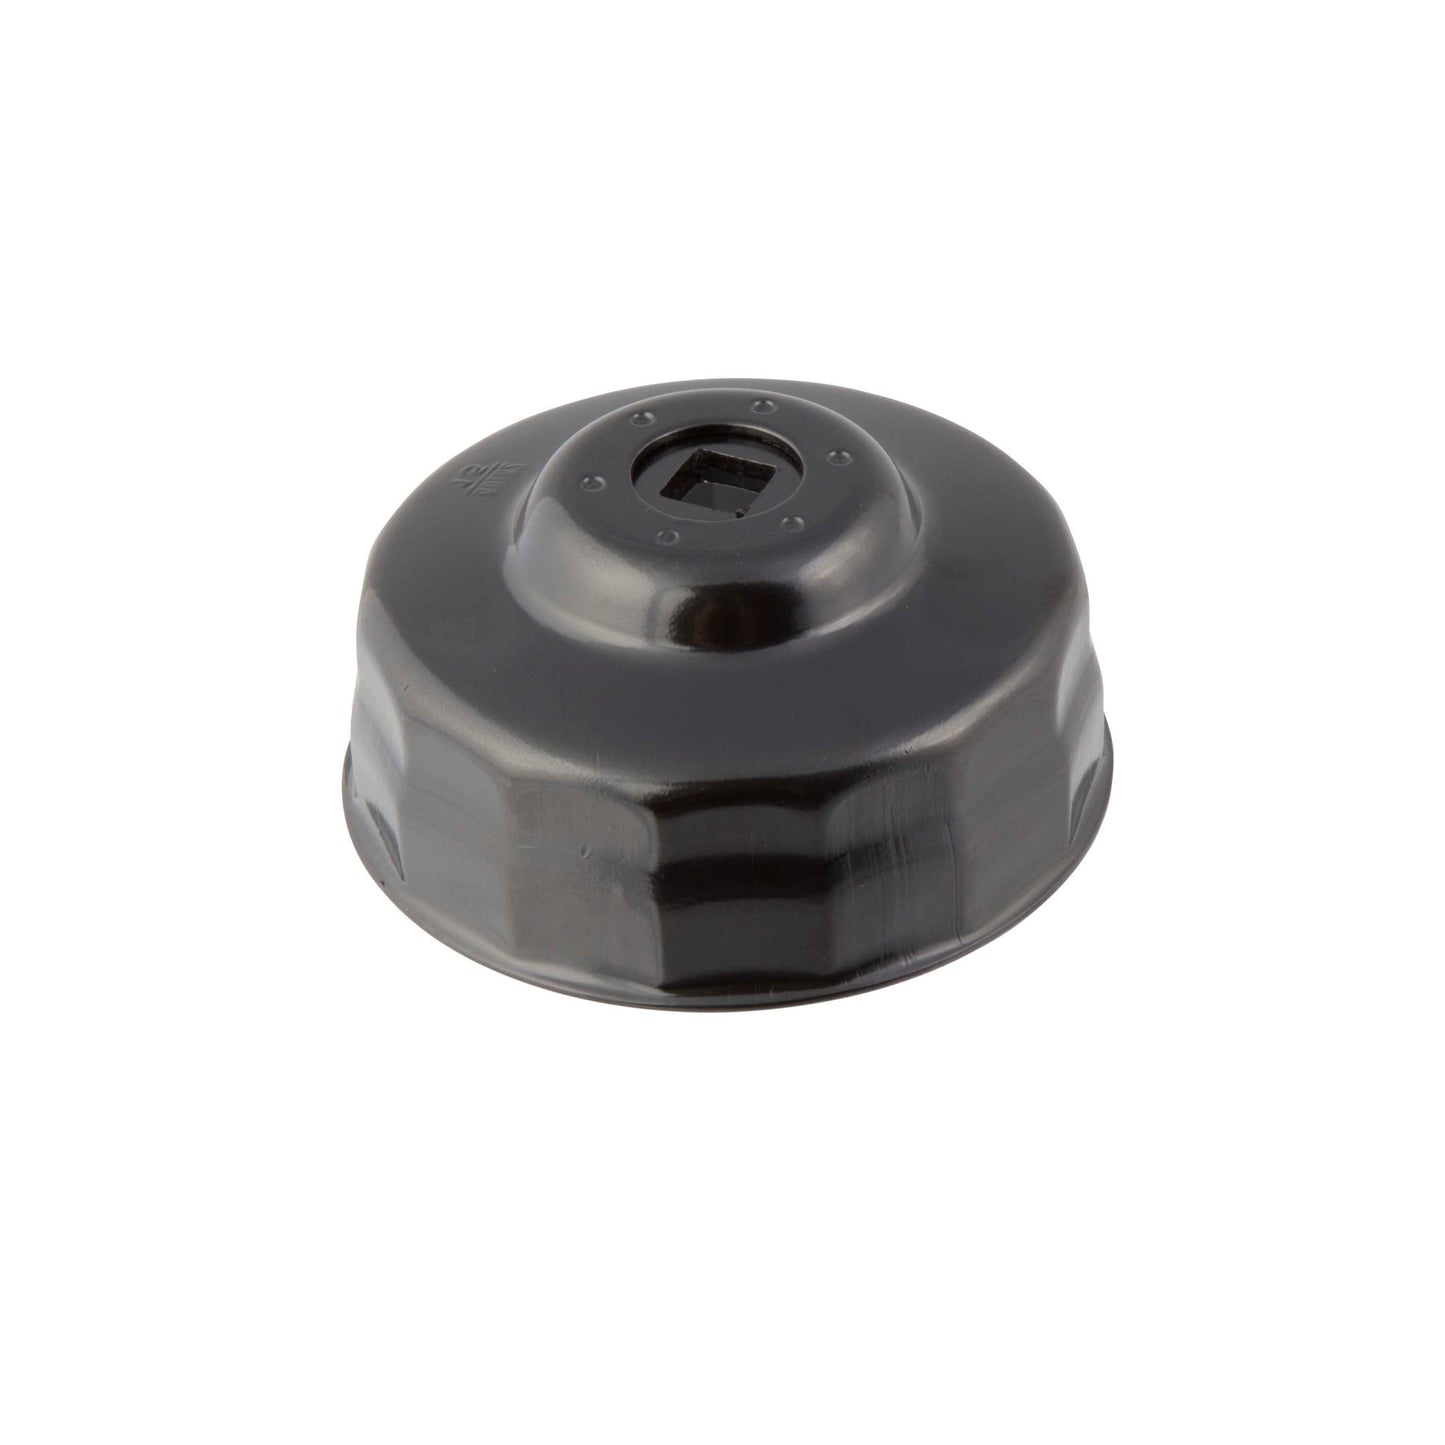 Oil Filter Cap Wrench 80mm and 82mm x 15 Flute